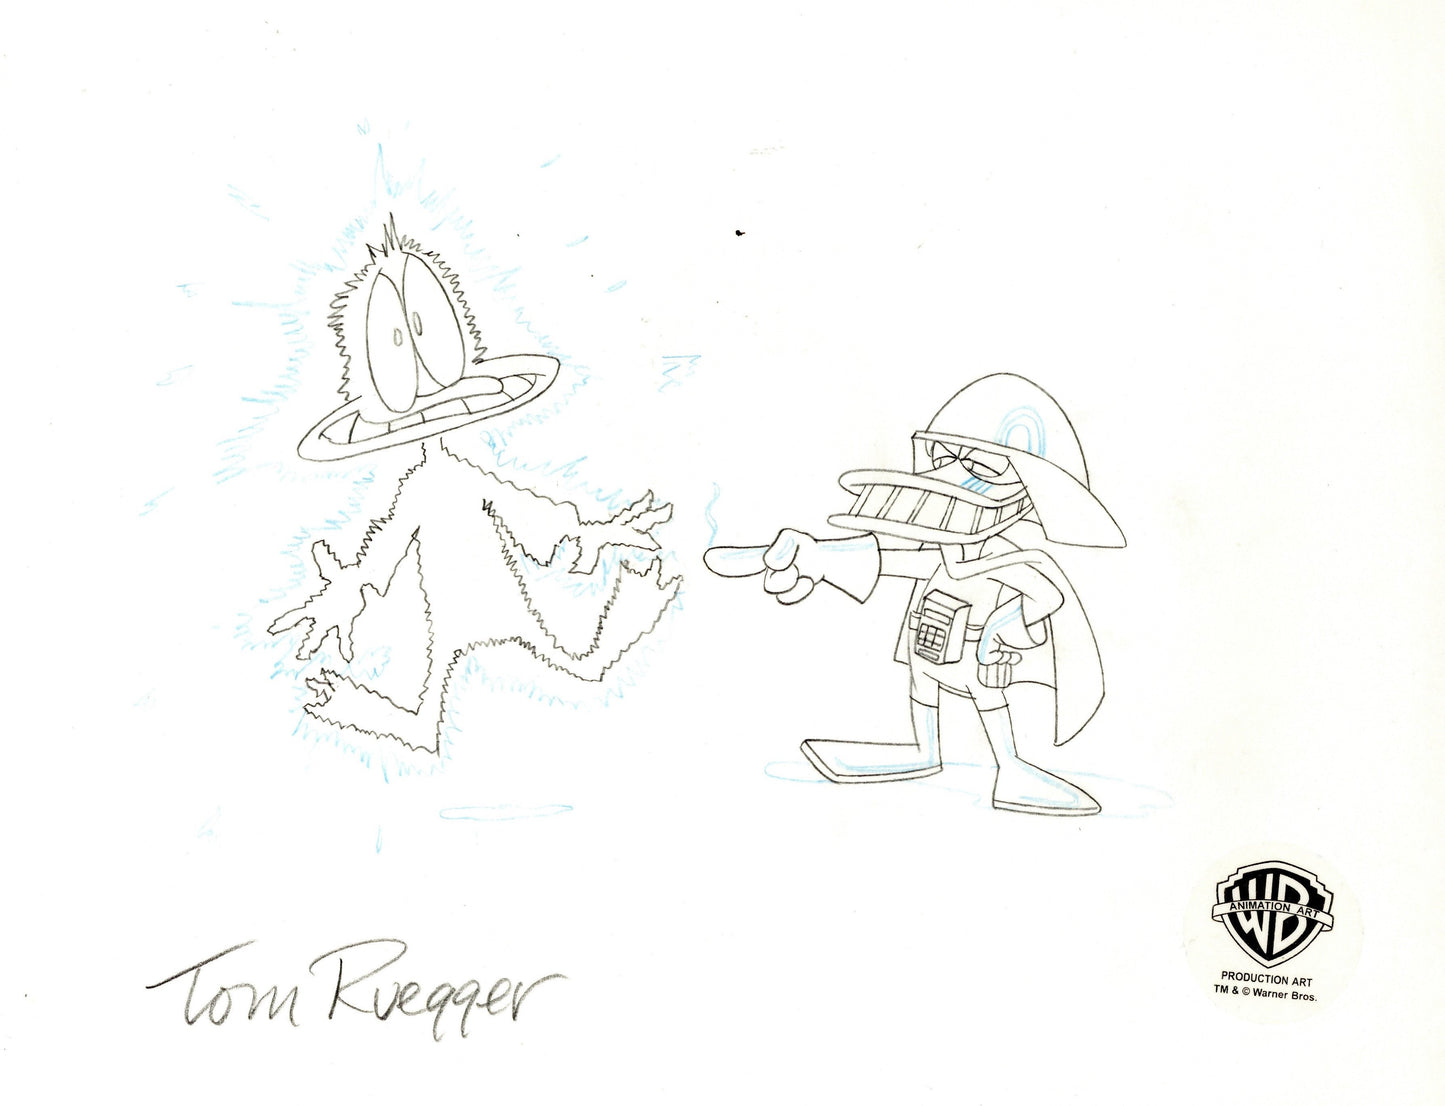 Tiny Toons Original Production Drawing Signed by Tom Ruegger: Duck Vader and Plucky Duck